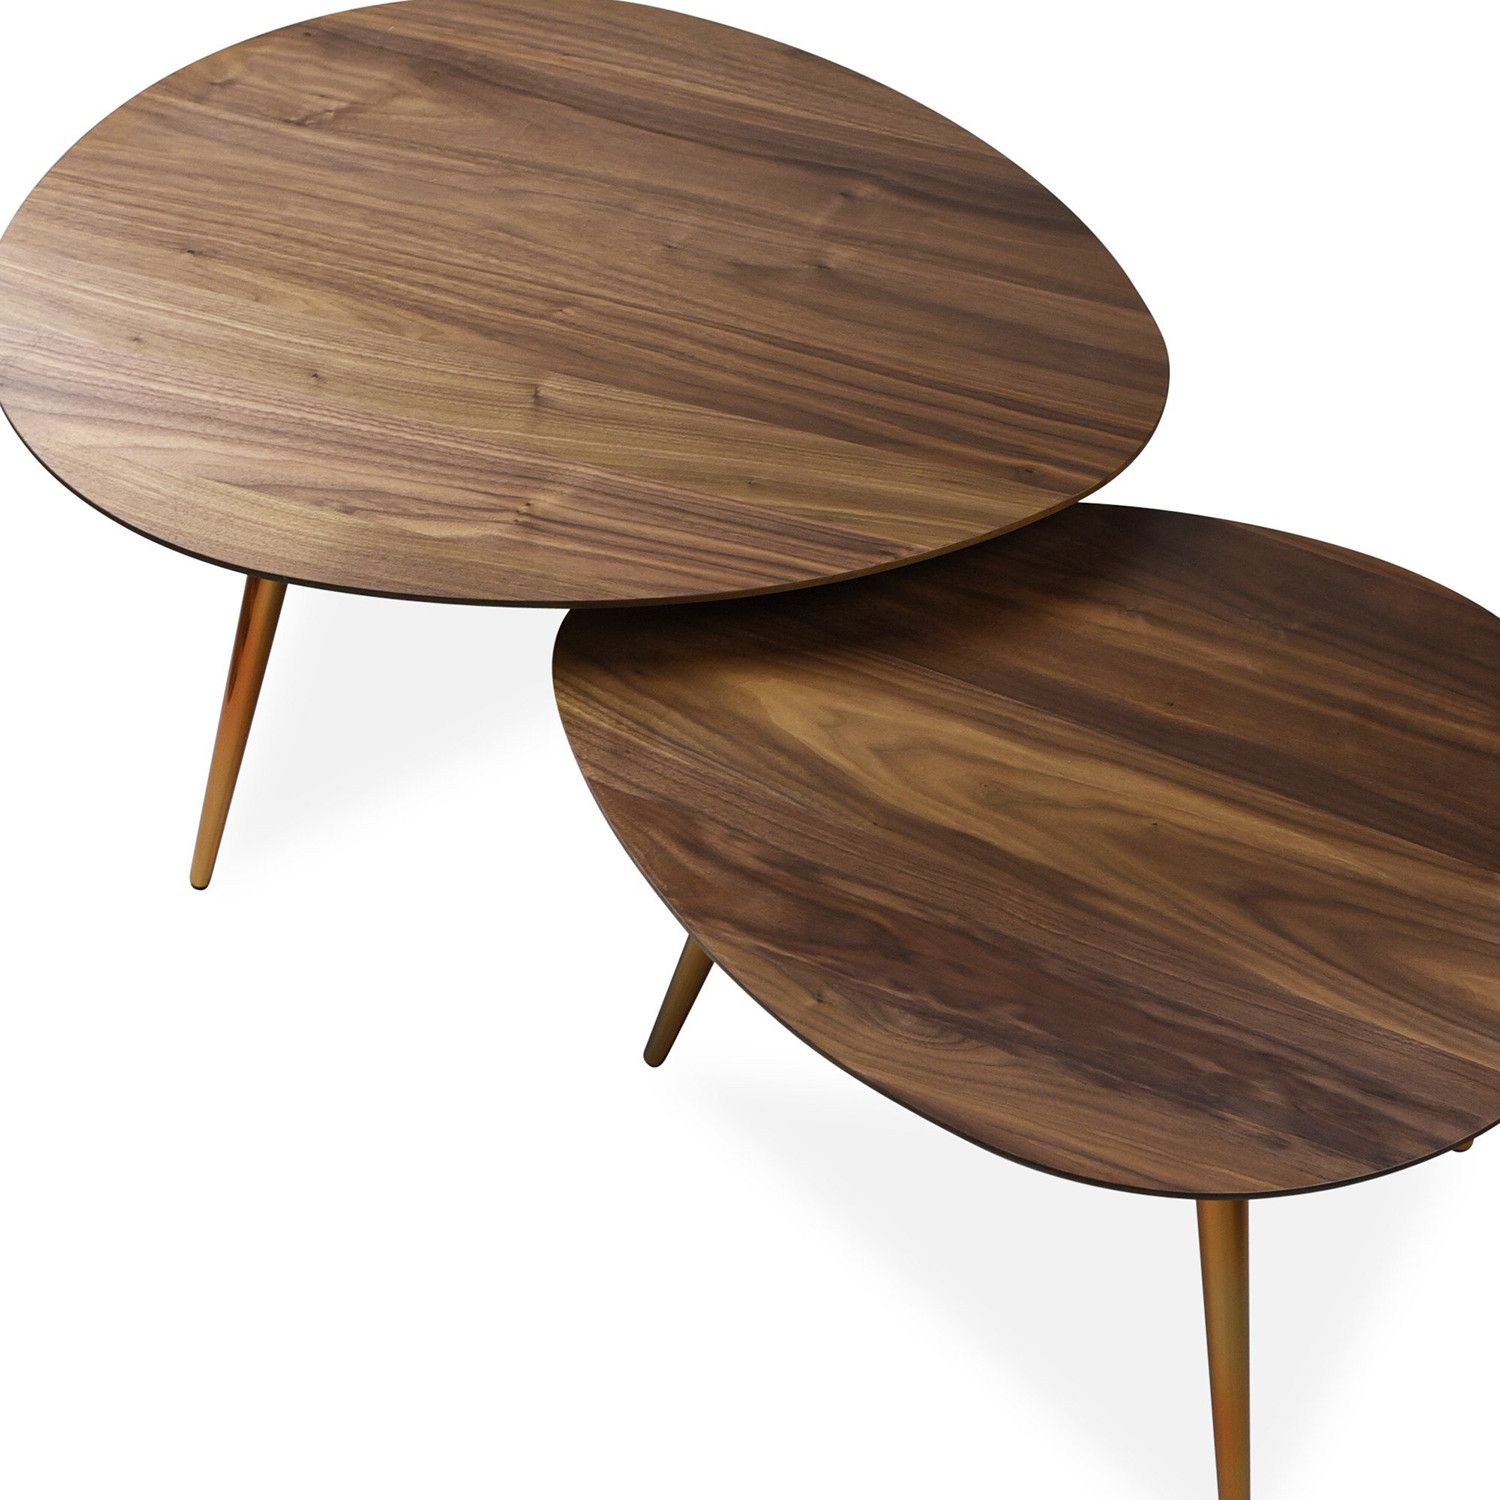 Maddox Mid Century Modern Nesting Coffee Table Set – Edloe Finch With Regard To Mid Century Modern Coffee Tables (Gallery 9 of 20)